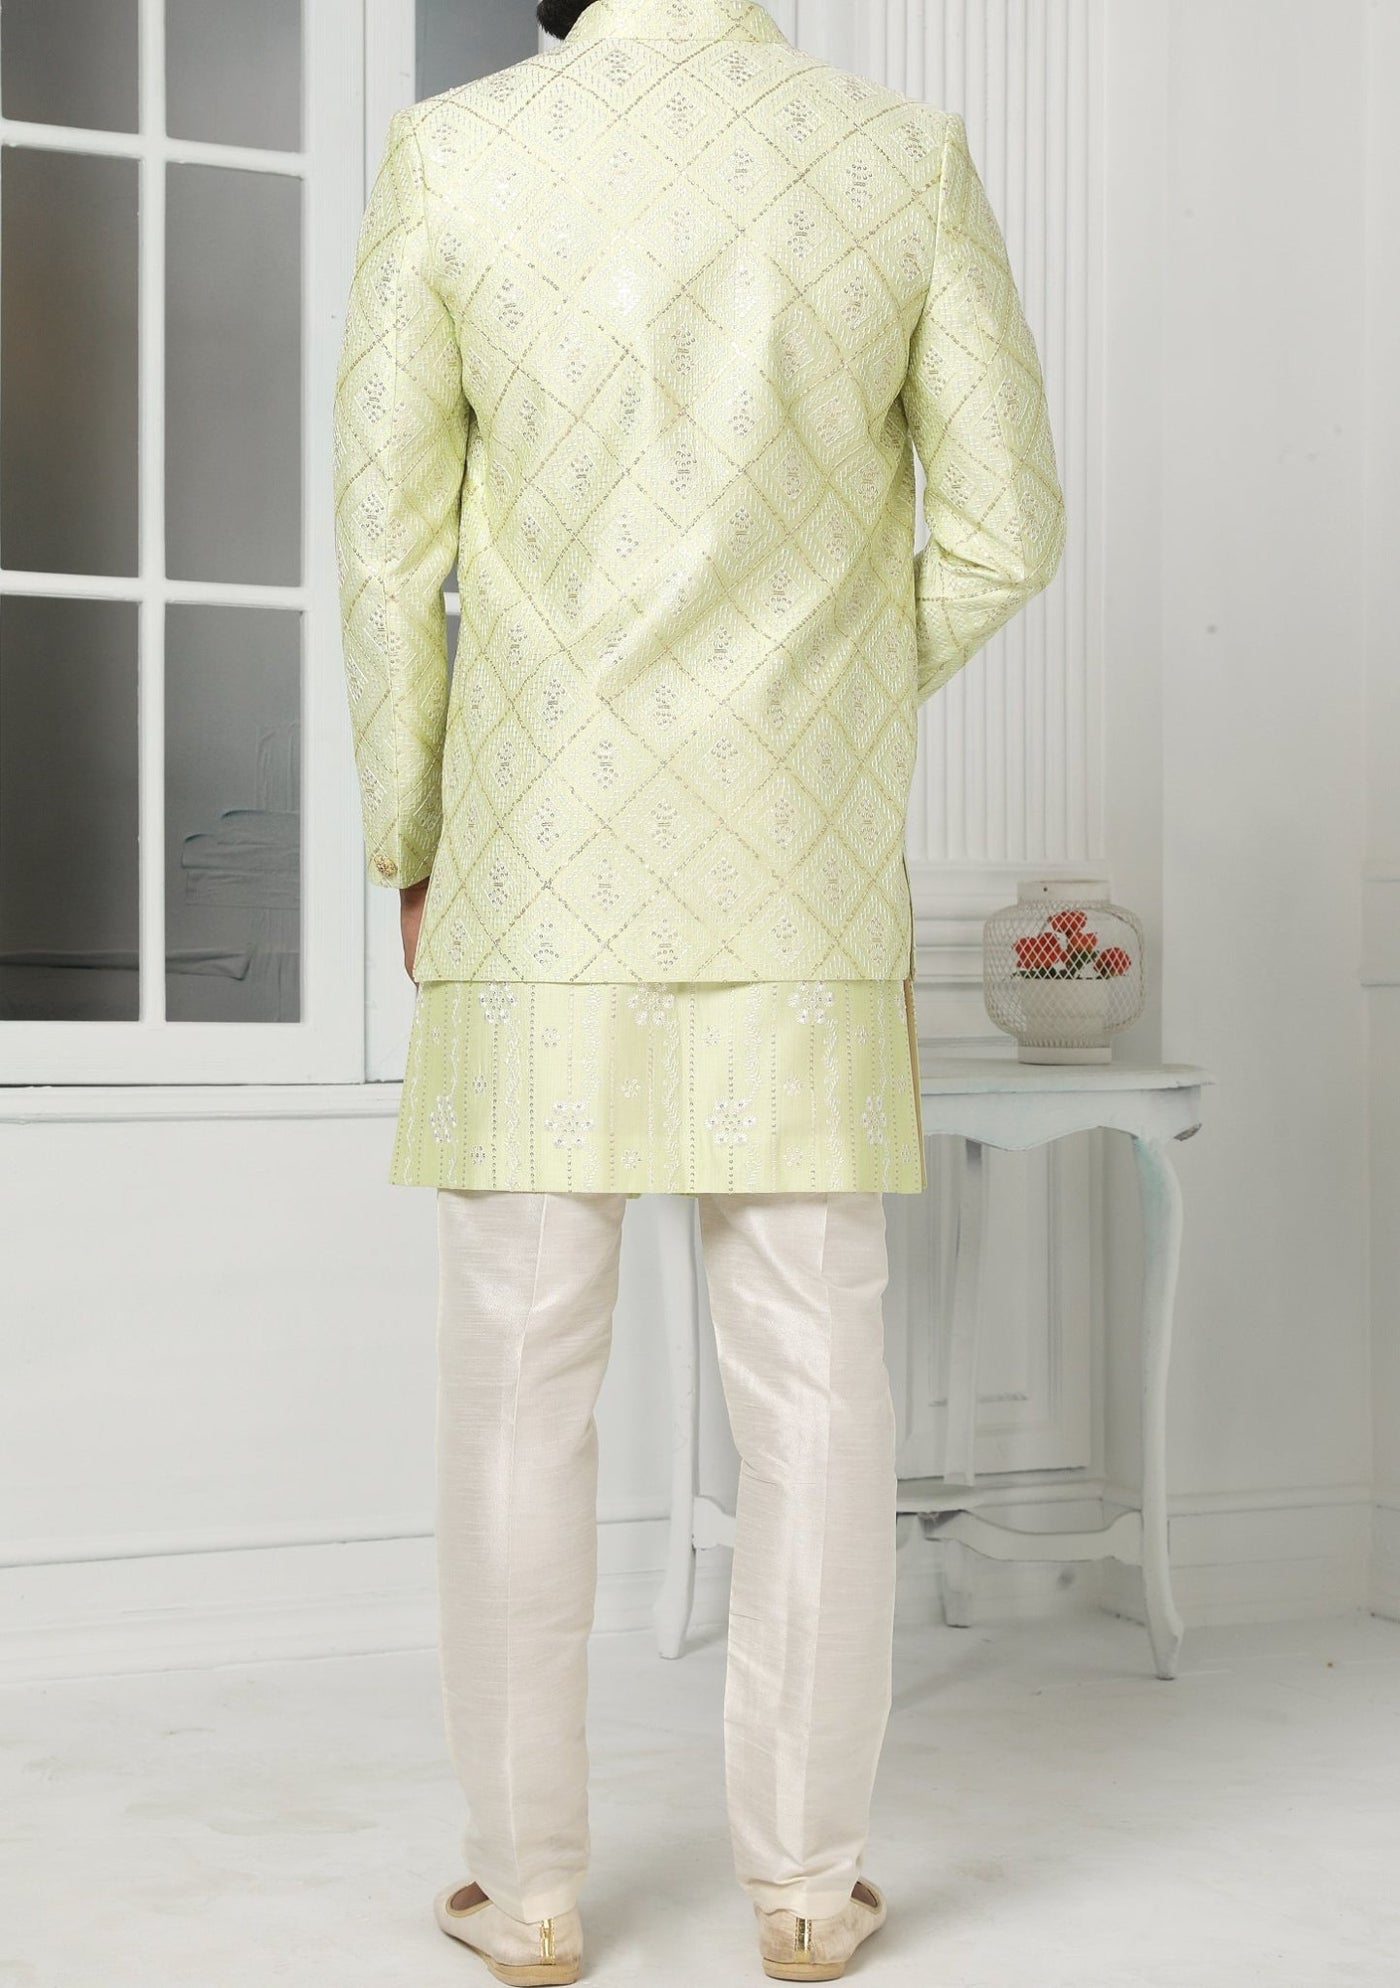 Men's Indo Western Party Wear Sherwani Suit With Jacket - db20432